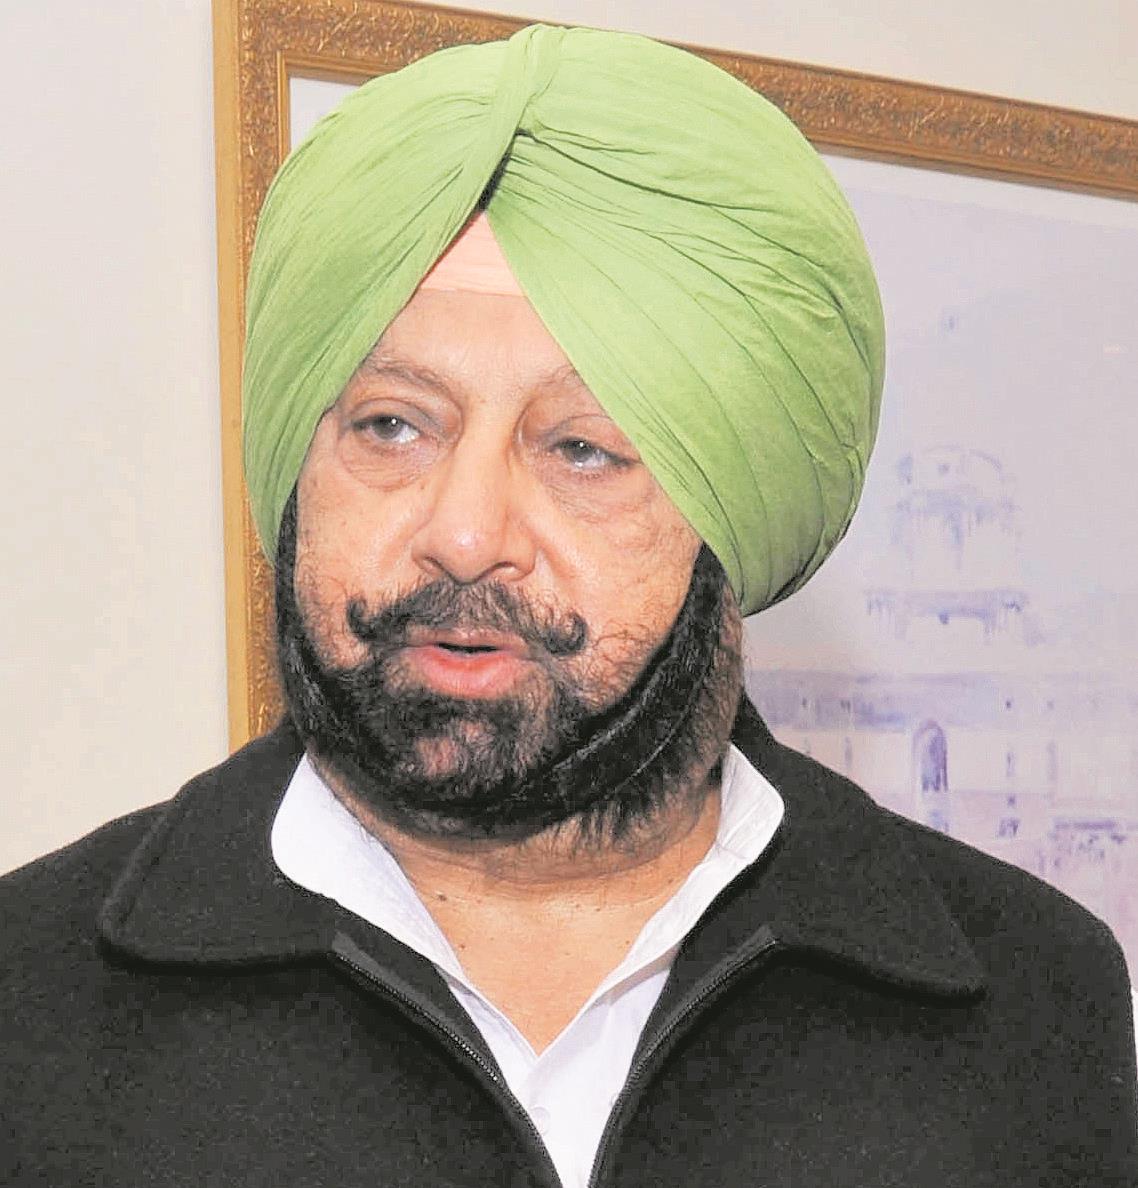 Punjab and Haryana High Court stays access to judicial file in Capt Amarinder Singh’s case